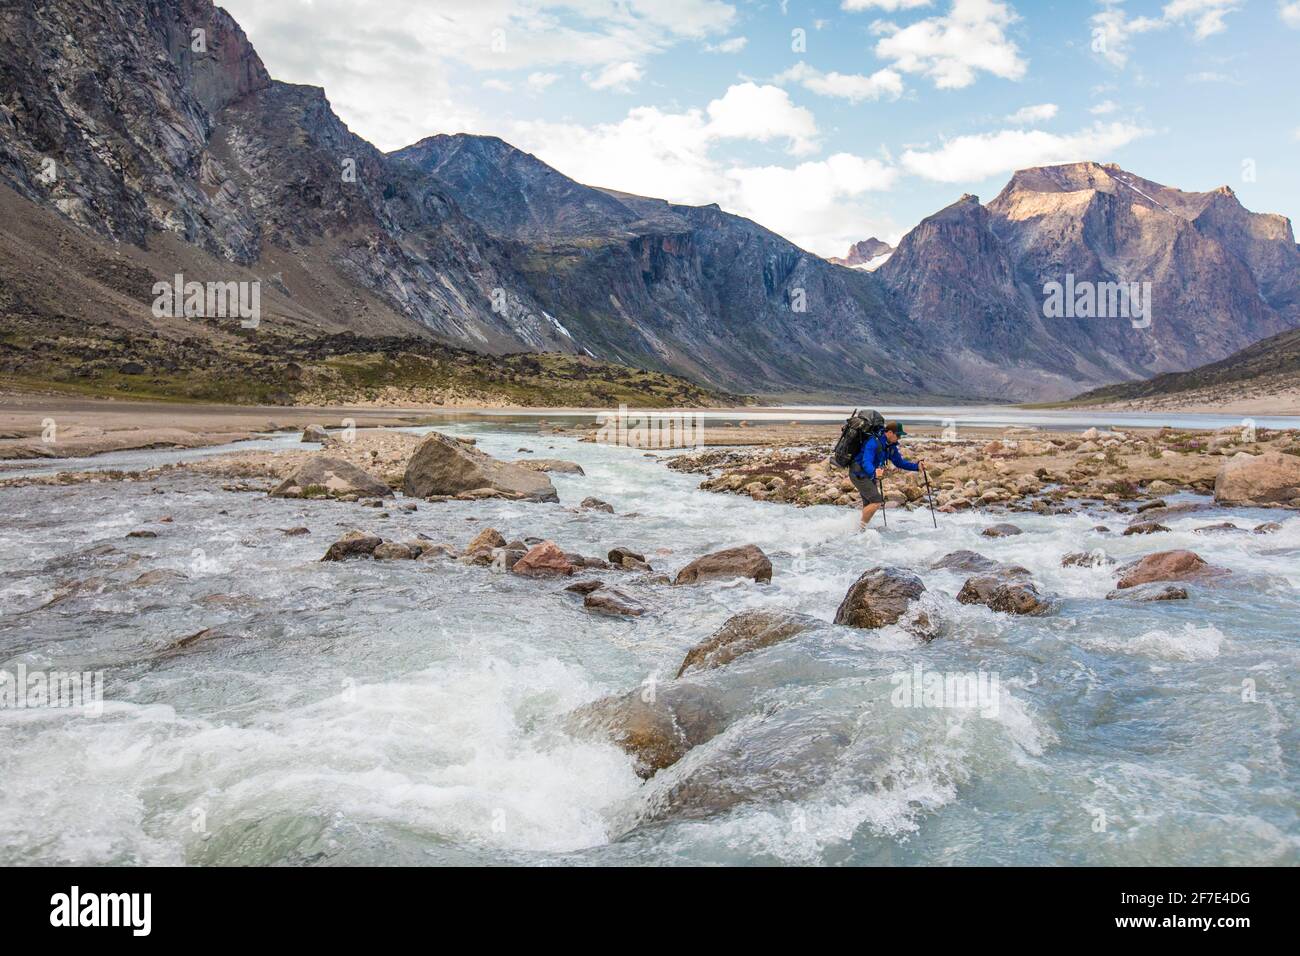 Backpacker crosses cold, rushing river on Baffin Island Stock Photo